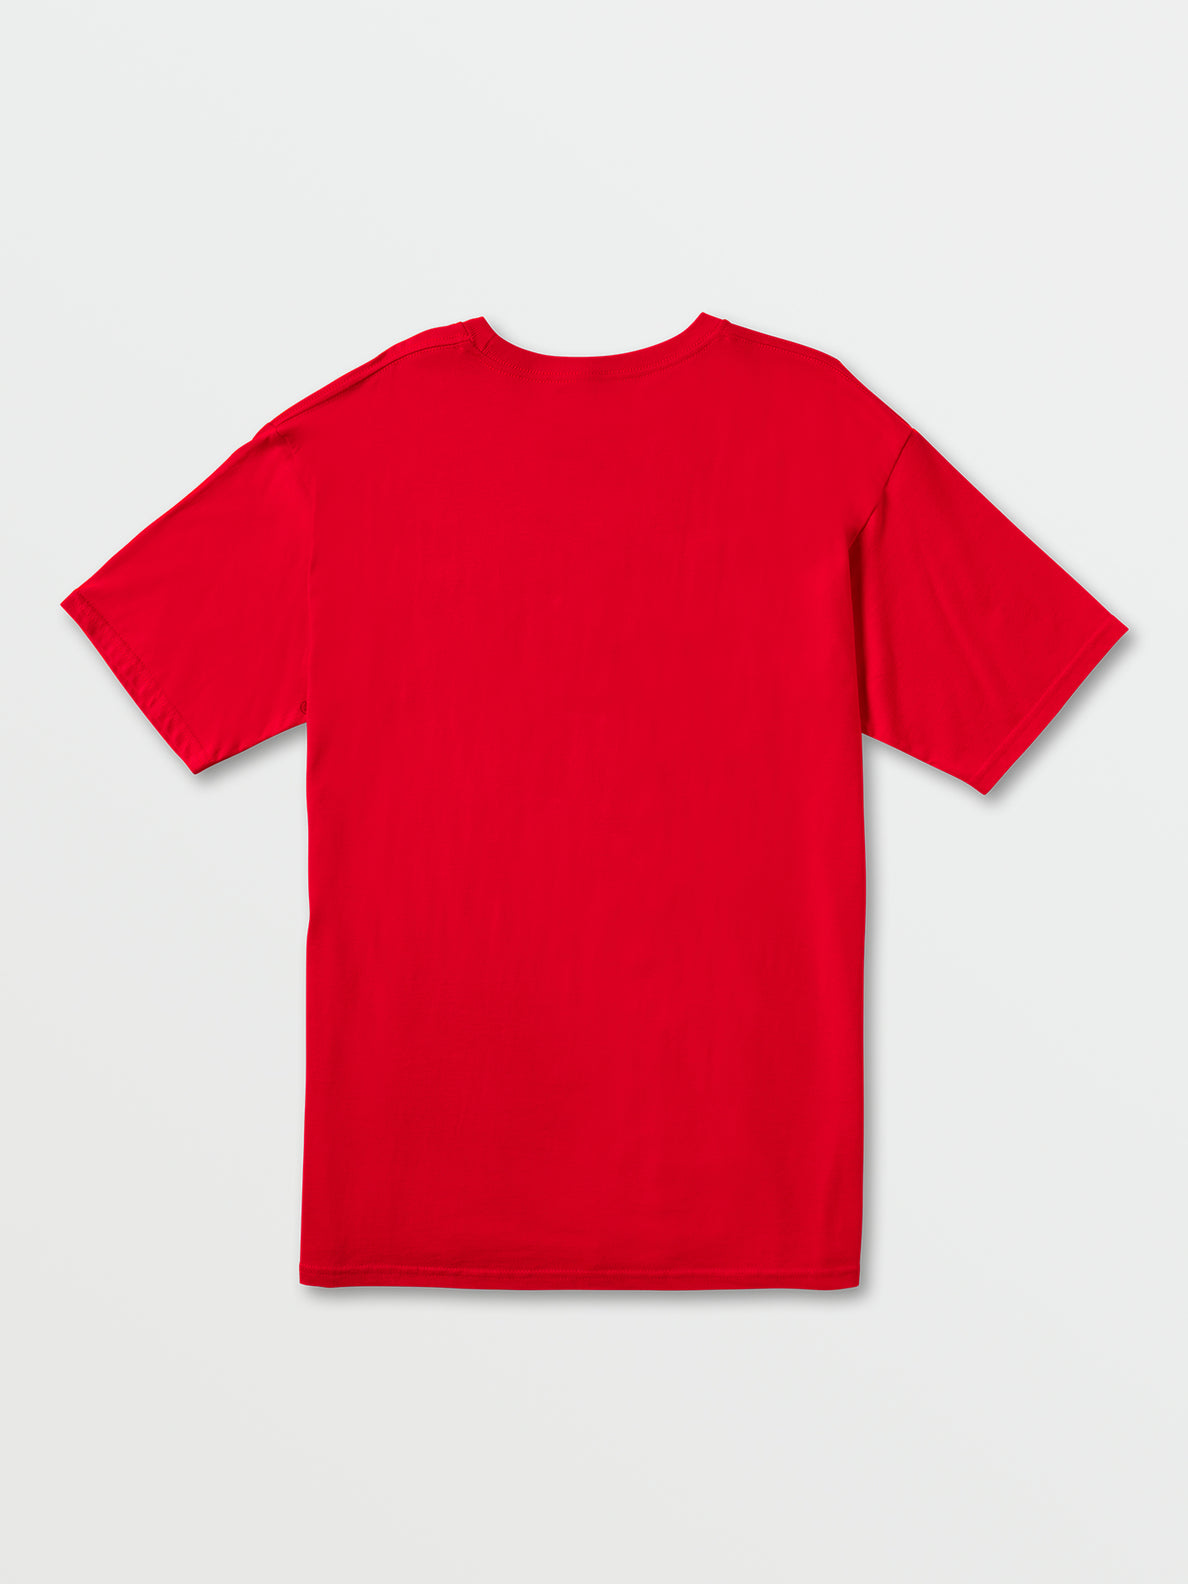 OVAL TRACK SHORT SLEEVE TEE - RED